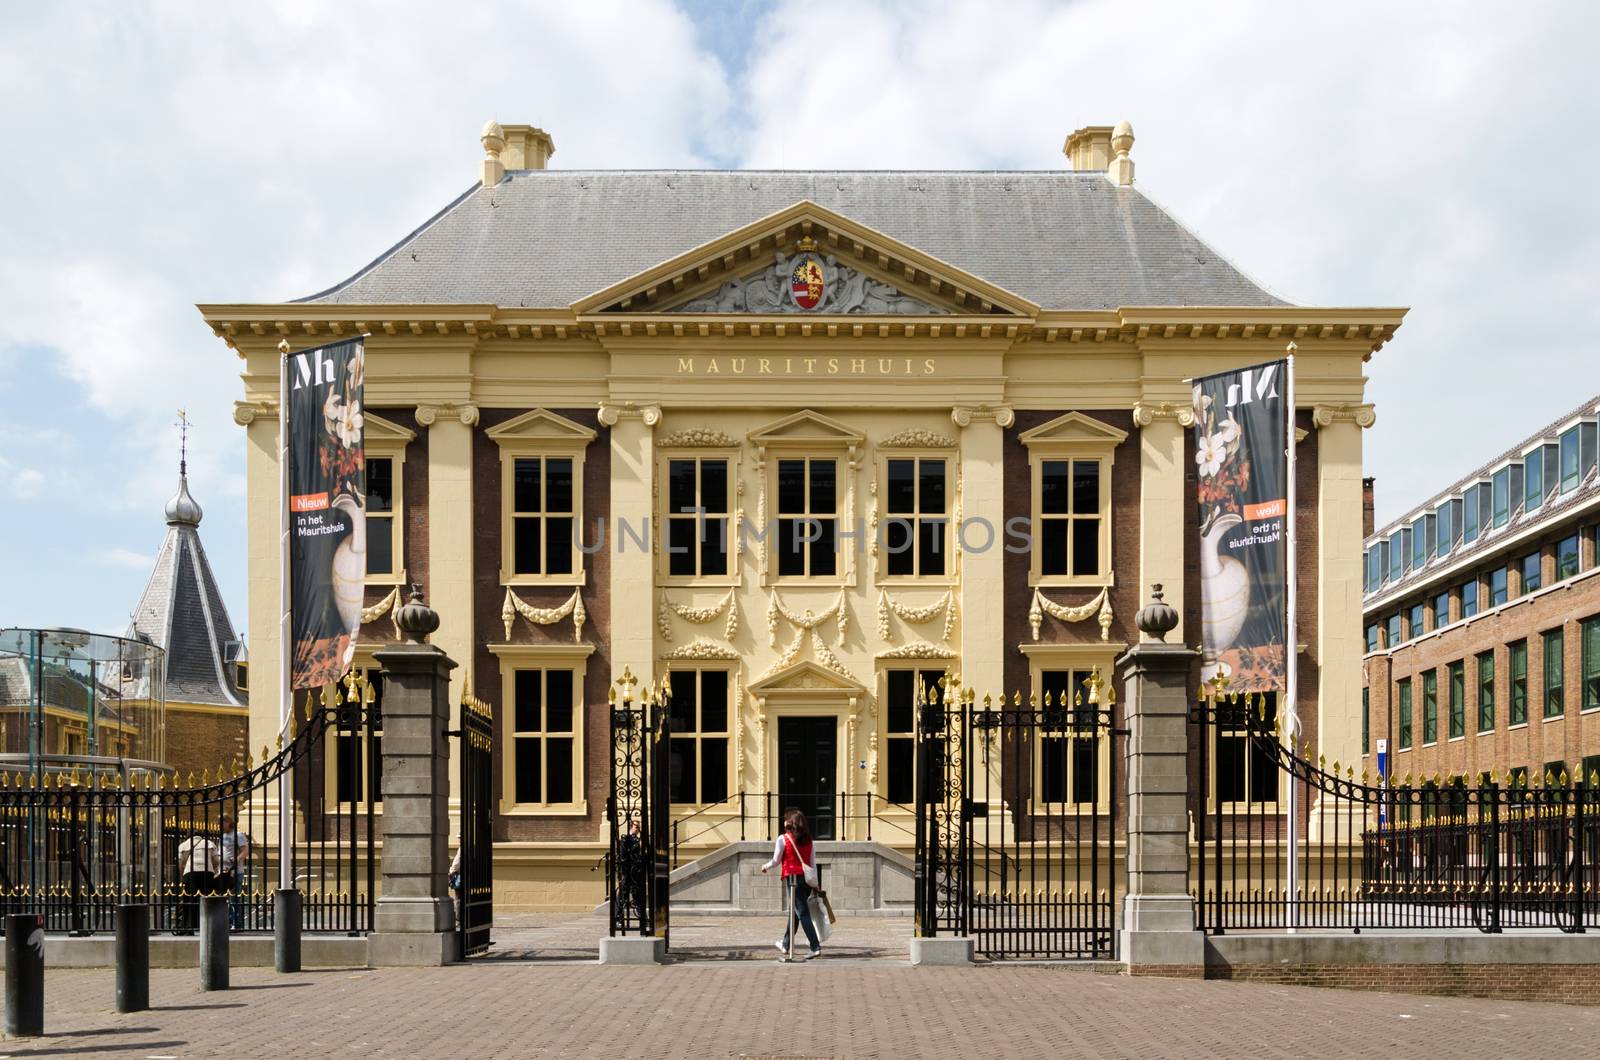 The Hague, Netherlands - May 8, 2015: Tourist visit Mauritshuis Museum in The Hague by siraanamwong